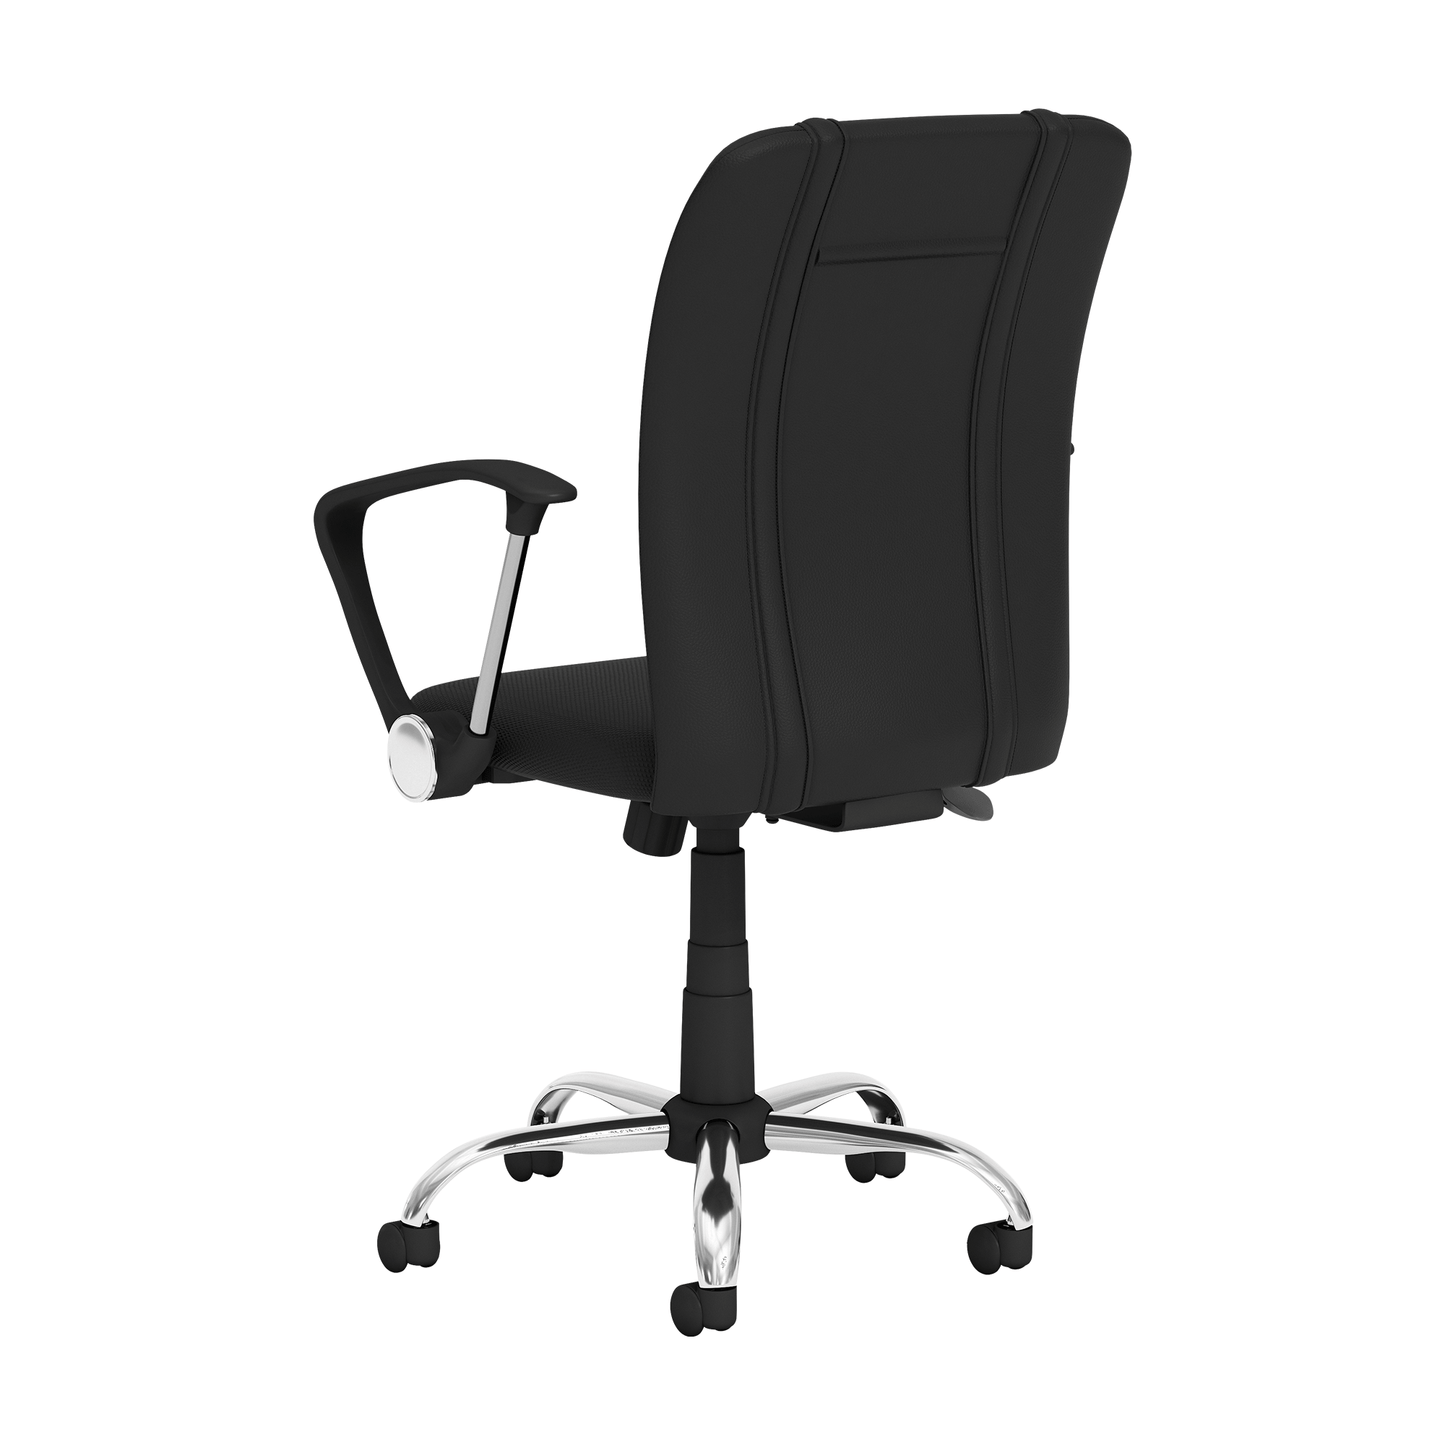 Curve Task Chair with Red Line Flag Logo Panel